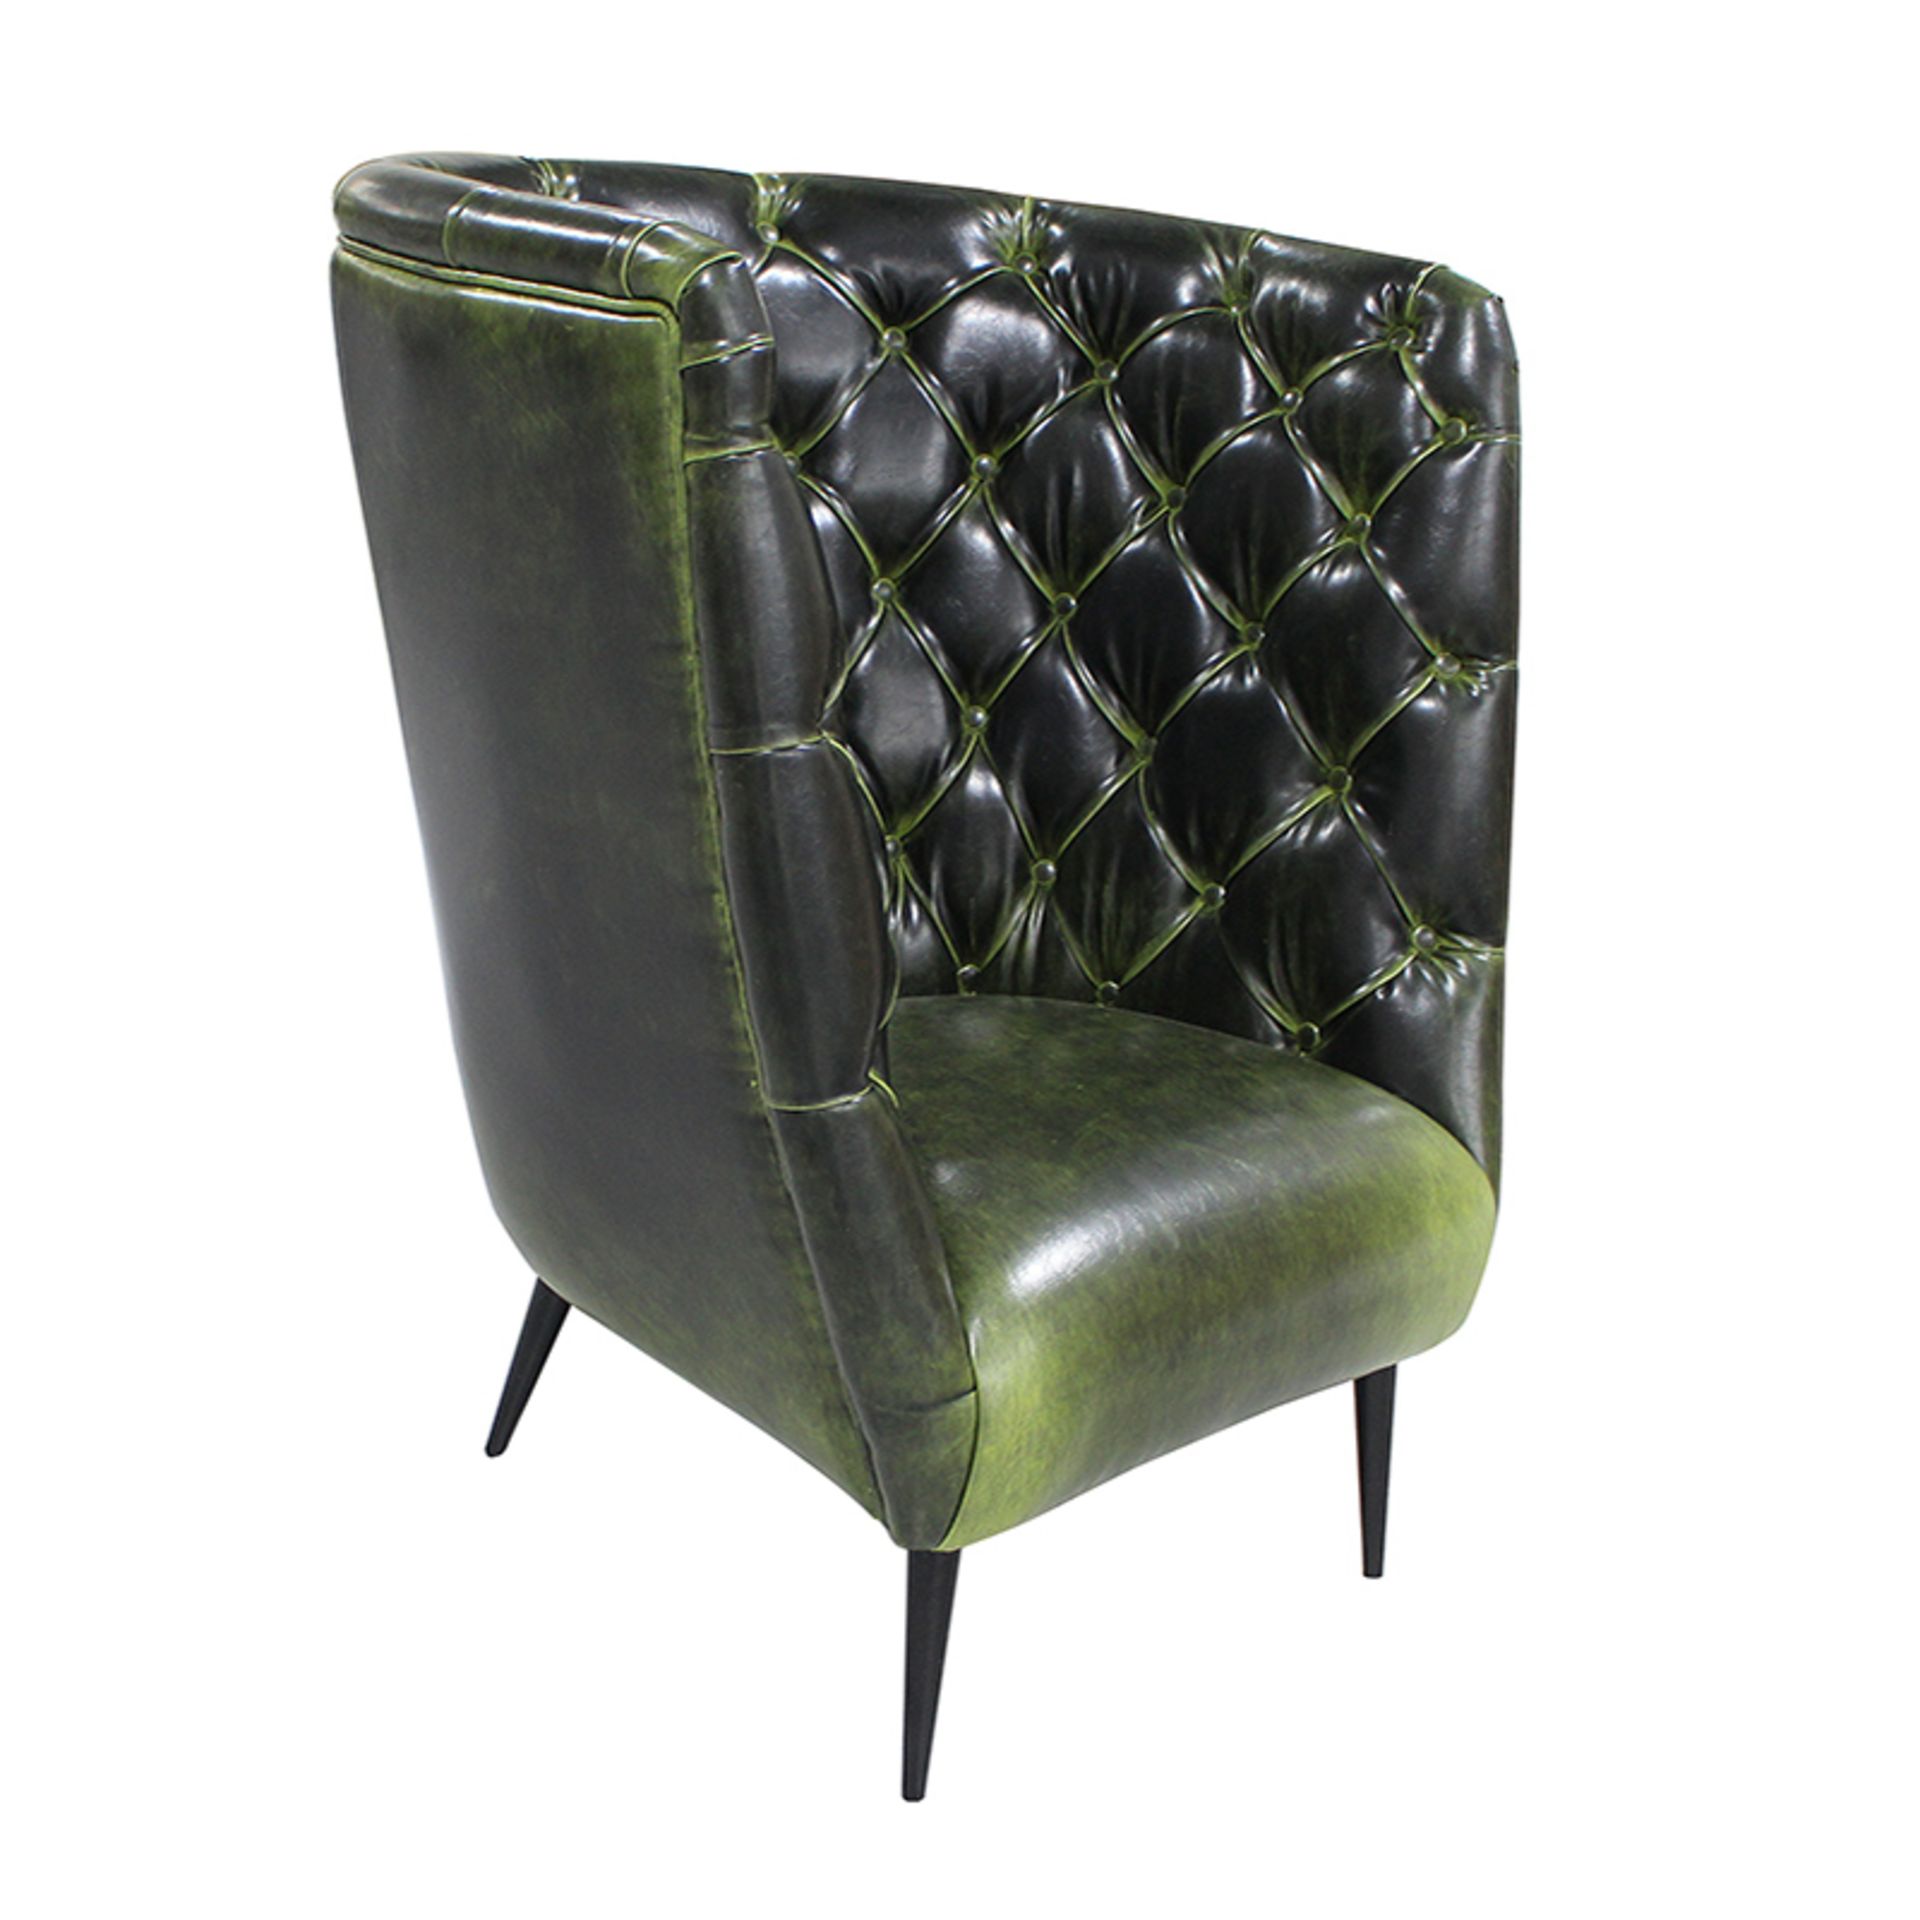 Eden Club Chair Upholstered in Faux leather green capitone Black wooden legs Size: 57 x 67 x 78 CM